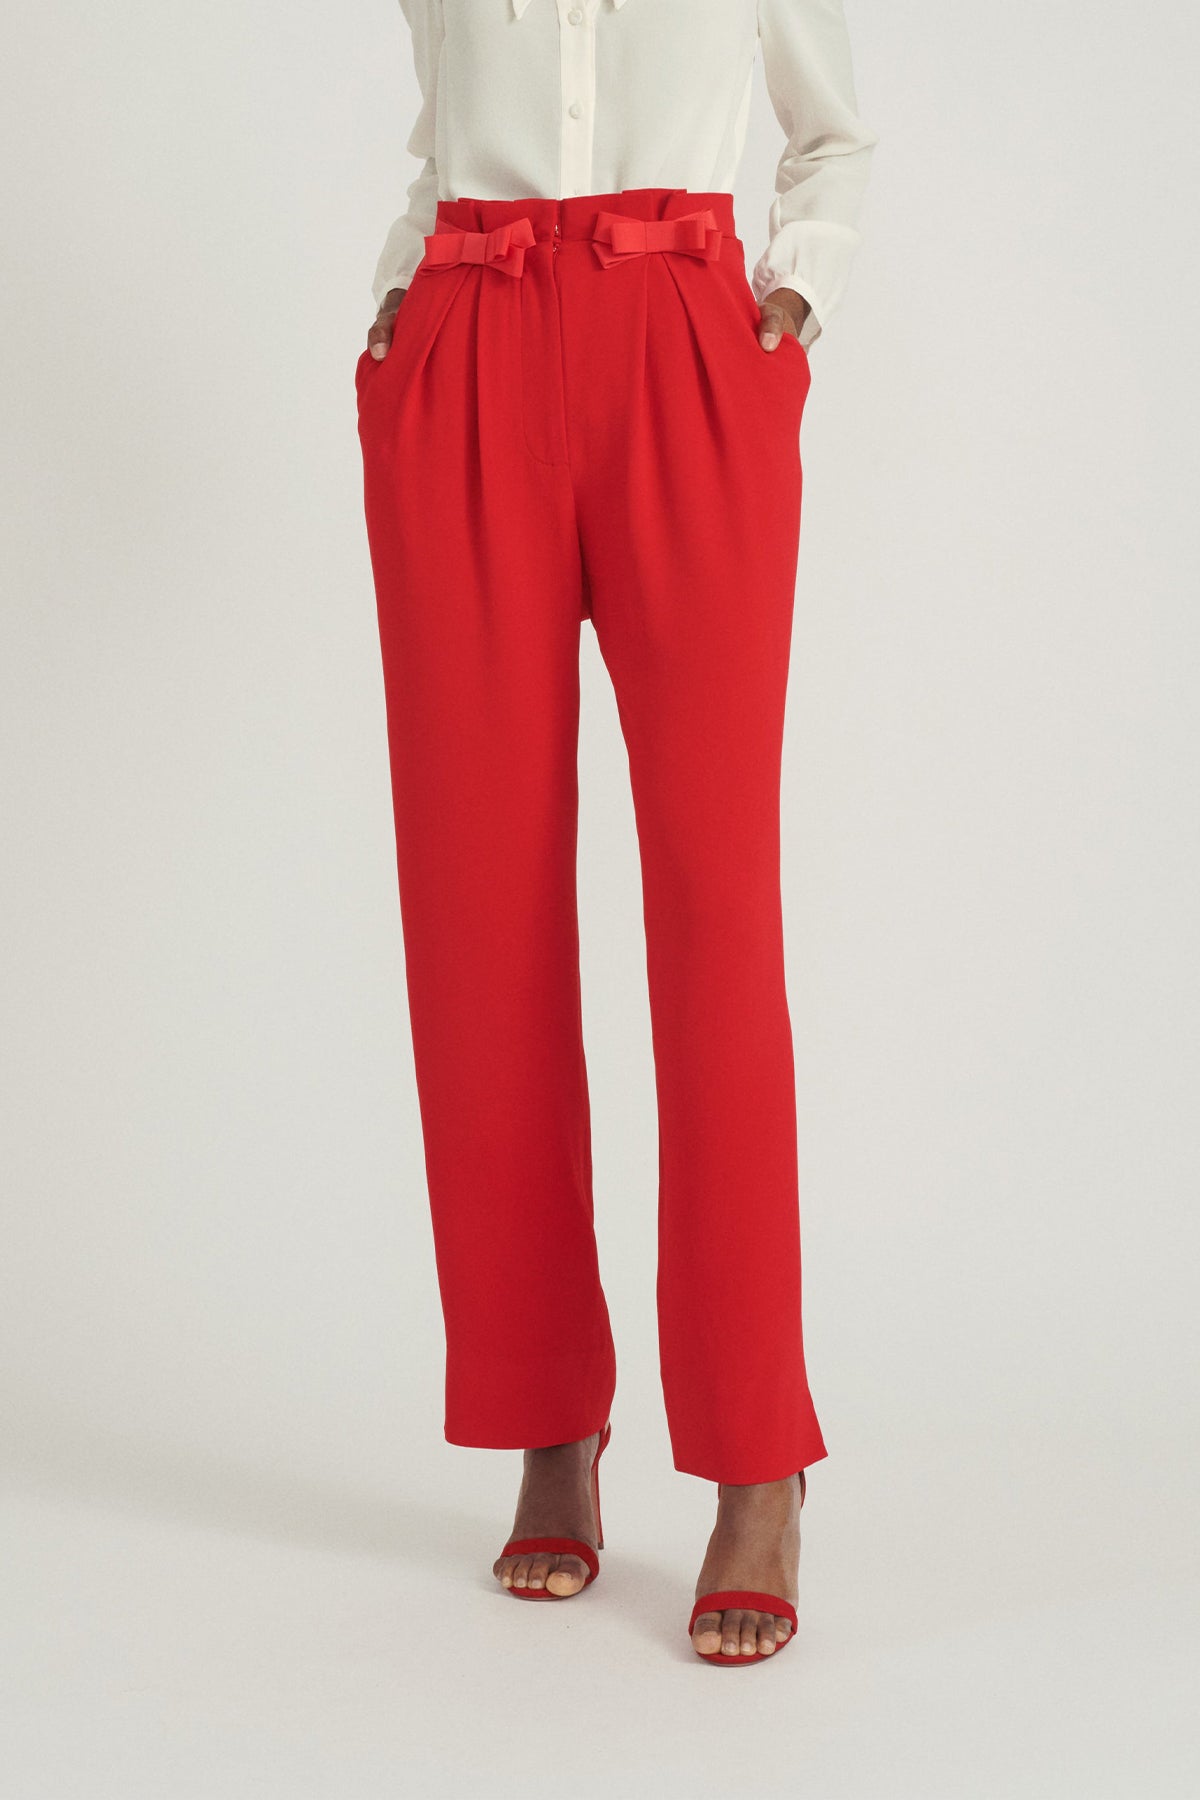 Bow Tulip Trousers in Scarlet - shop-olivia.com